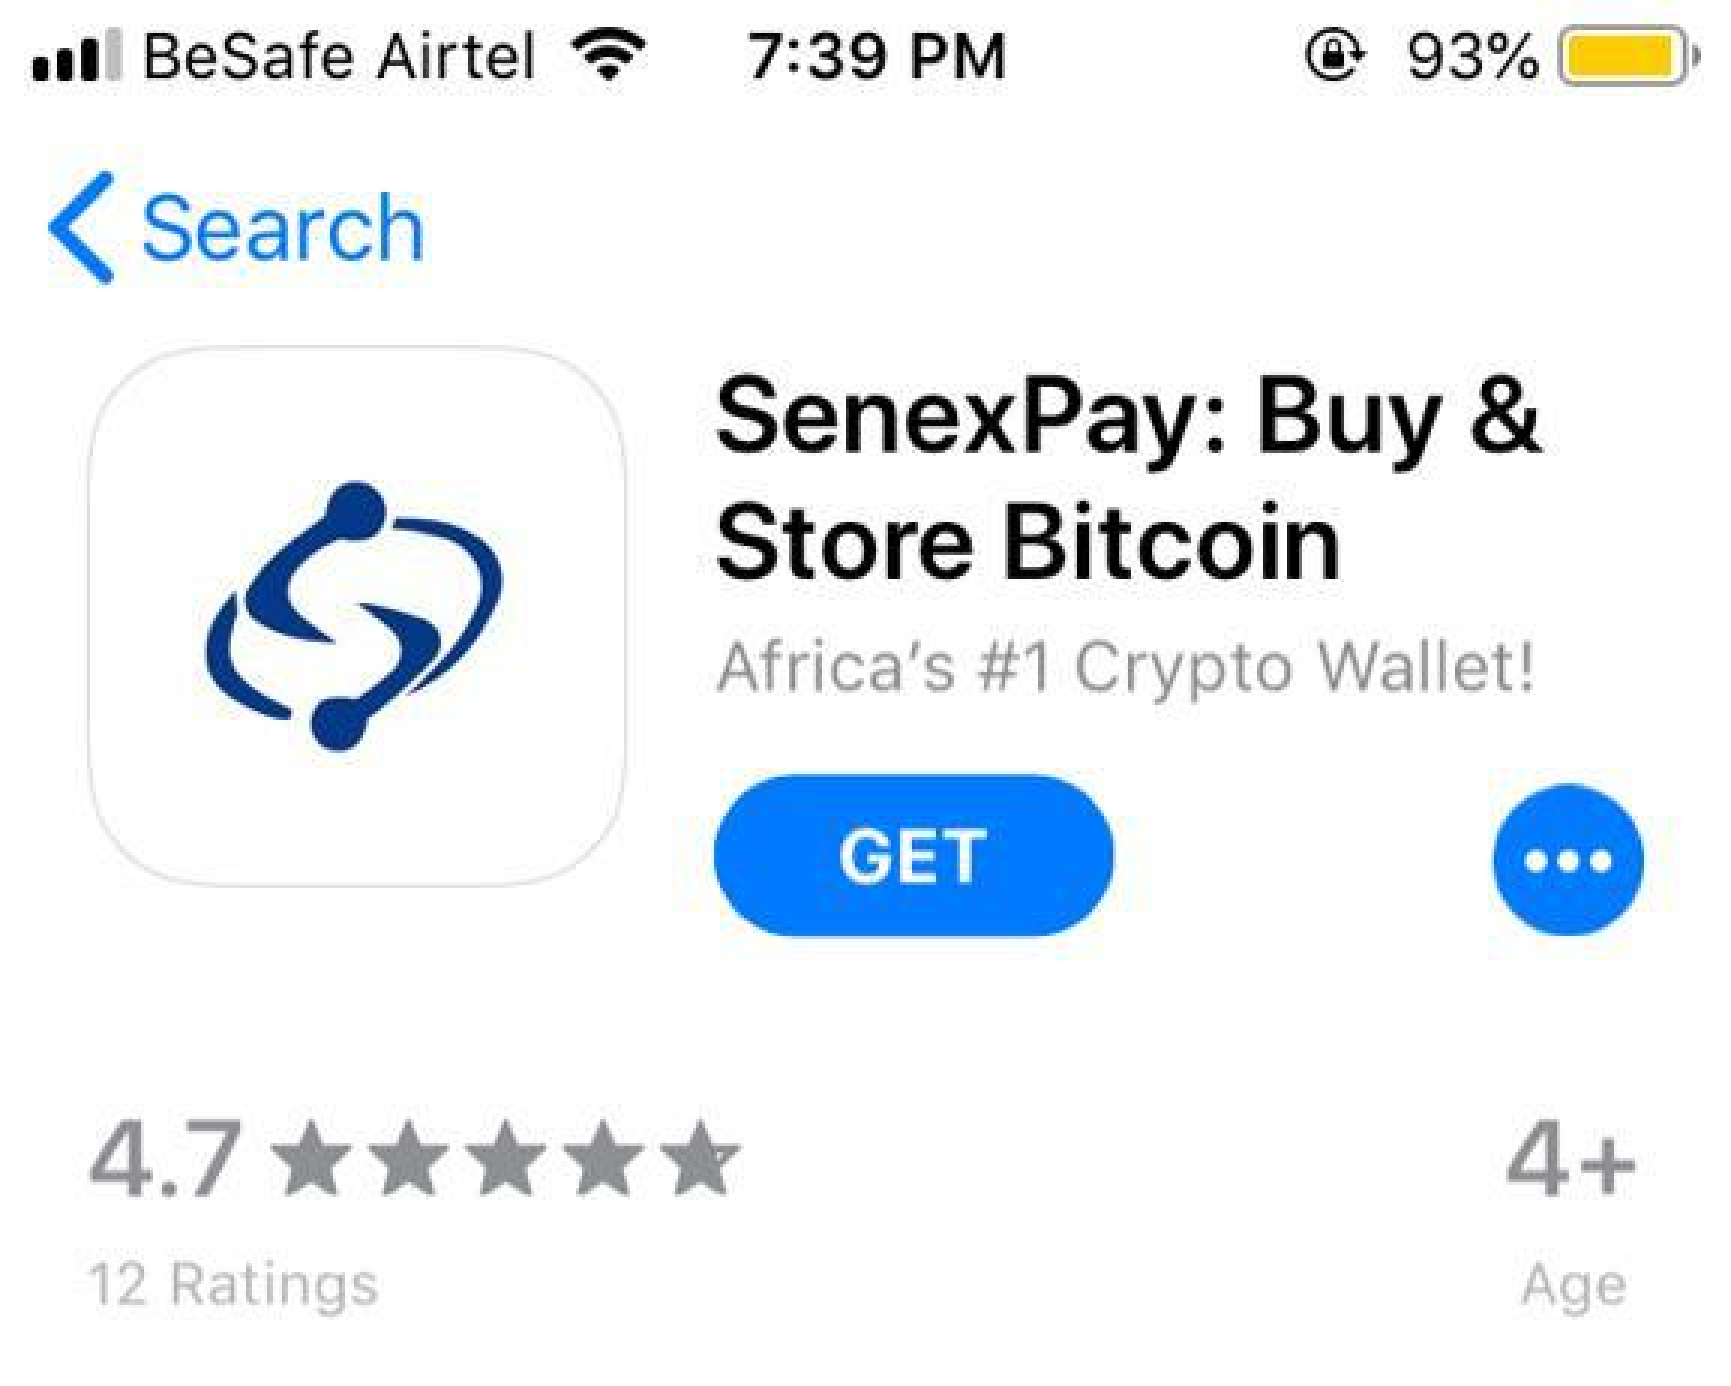 How to Buy Bitcoin, Ethereum, USDT, and other Digital Assets in Nigeria